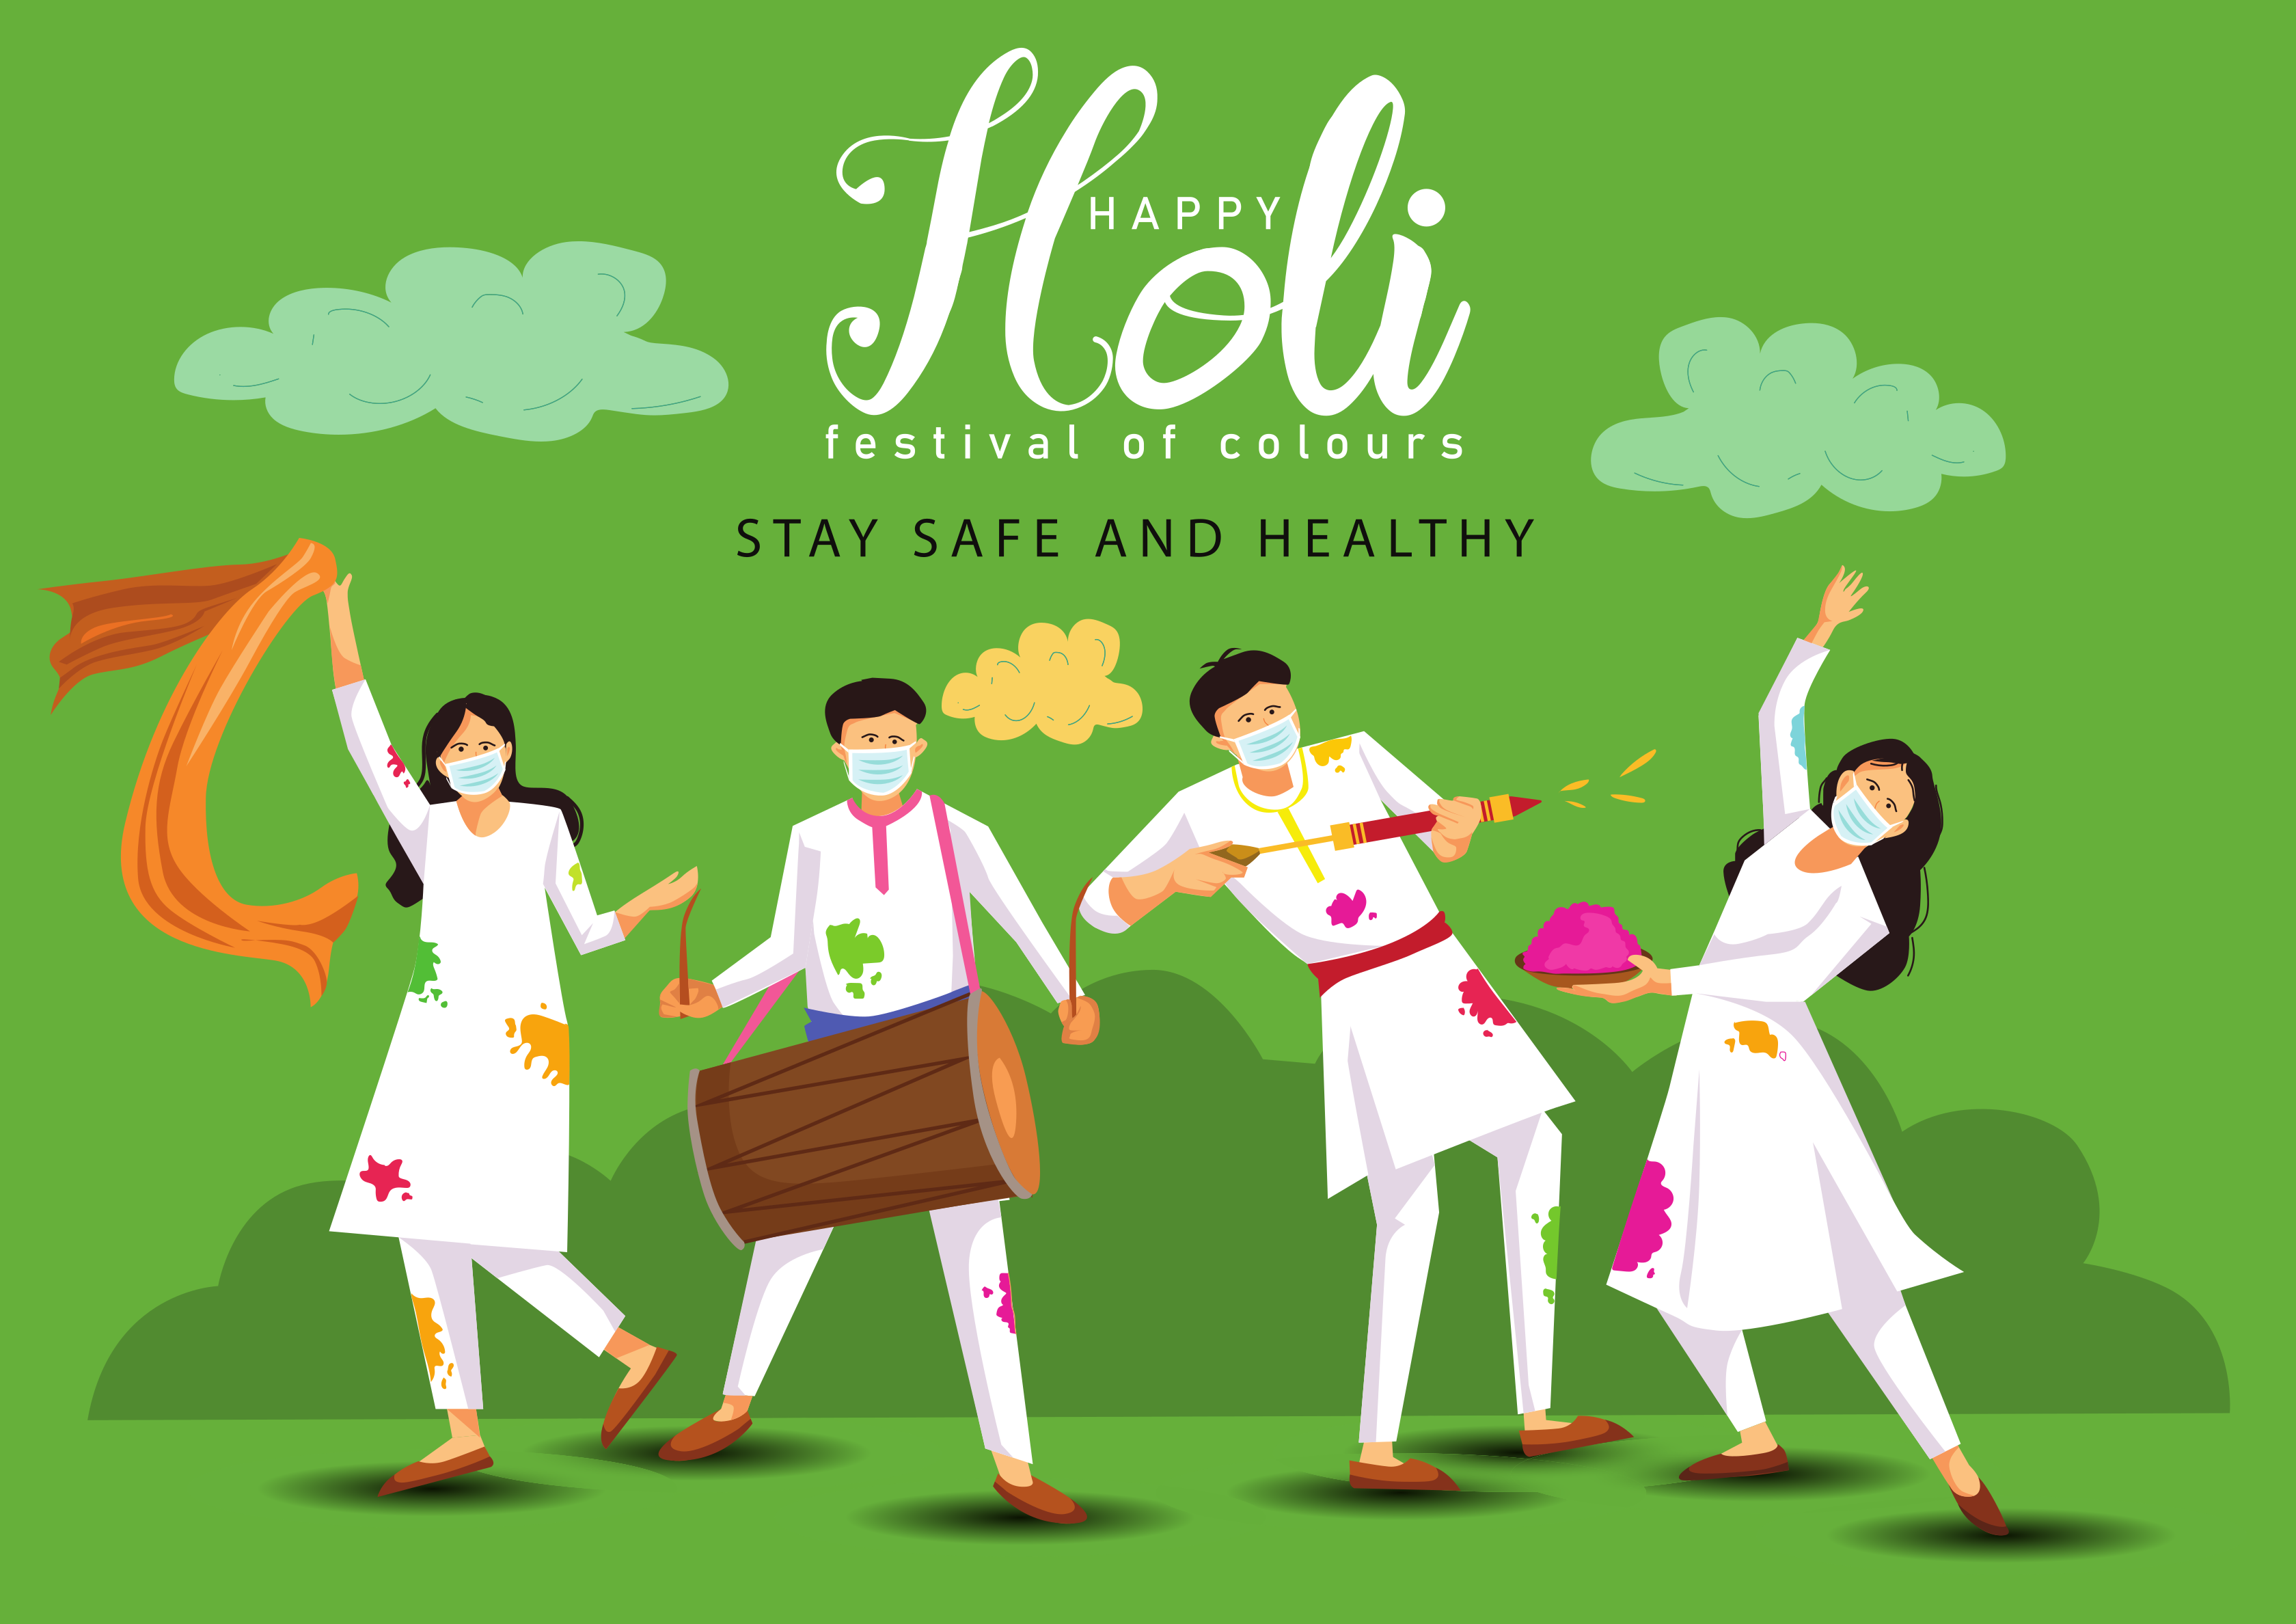 have a safe holi during the pandemic